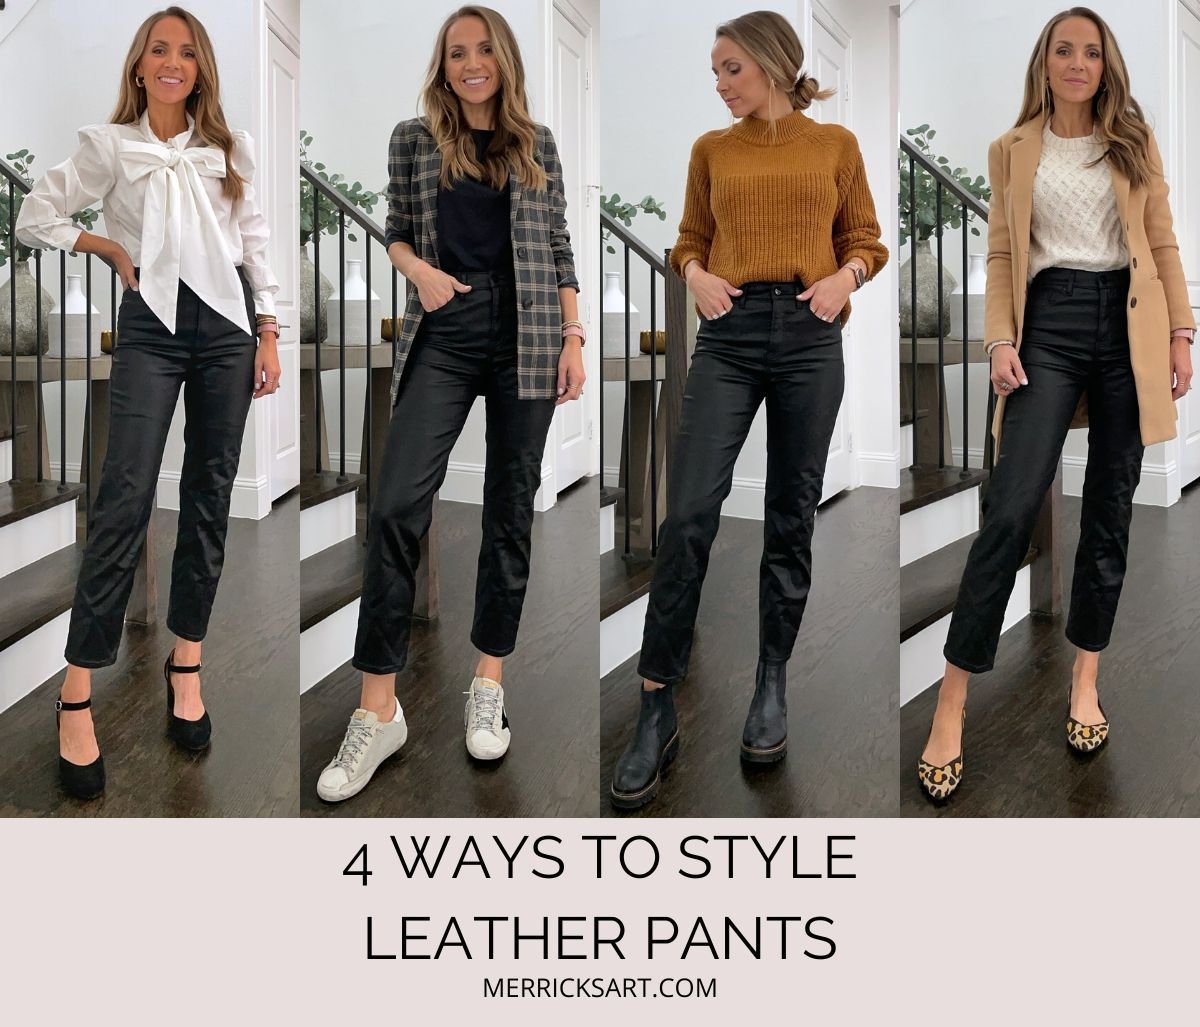 What To Wear With Leather Pants?